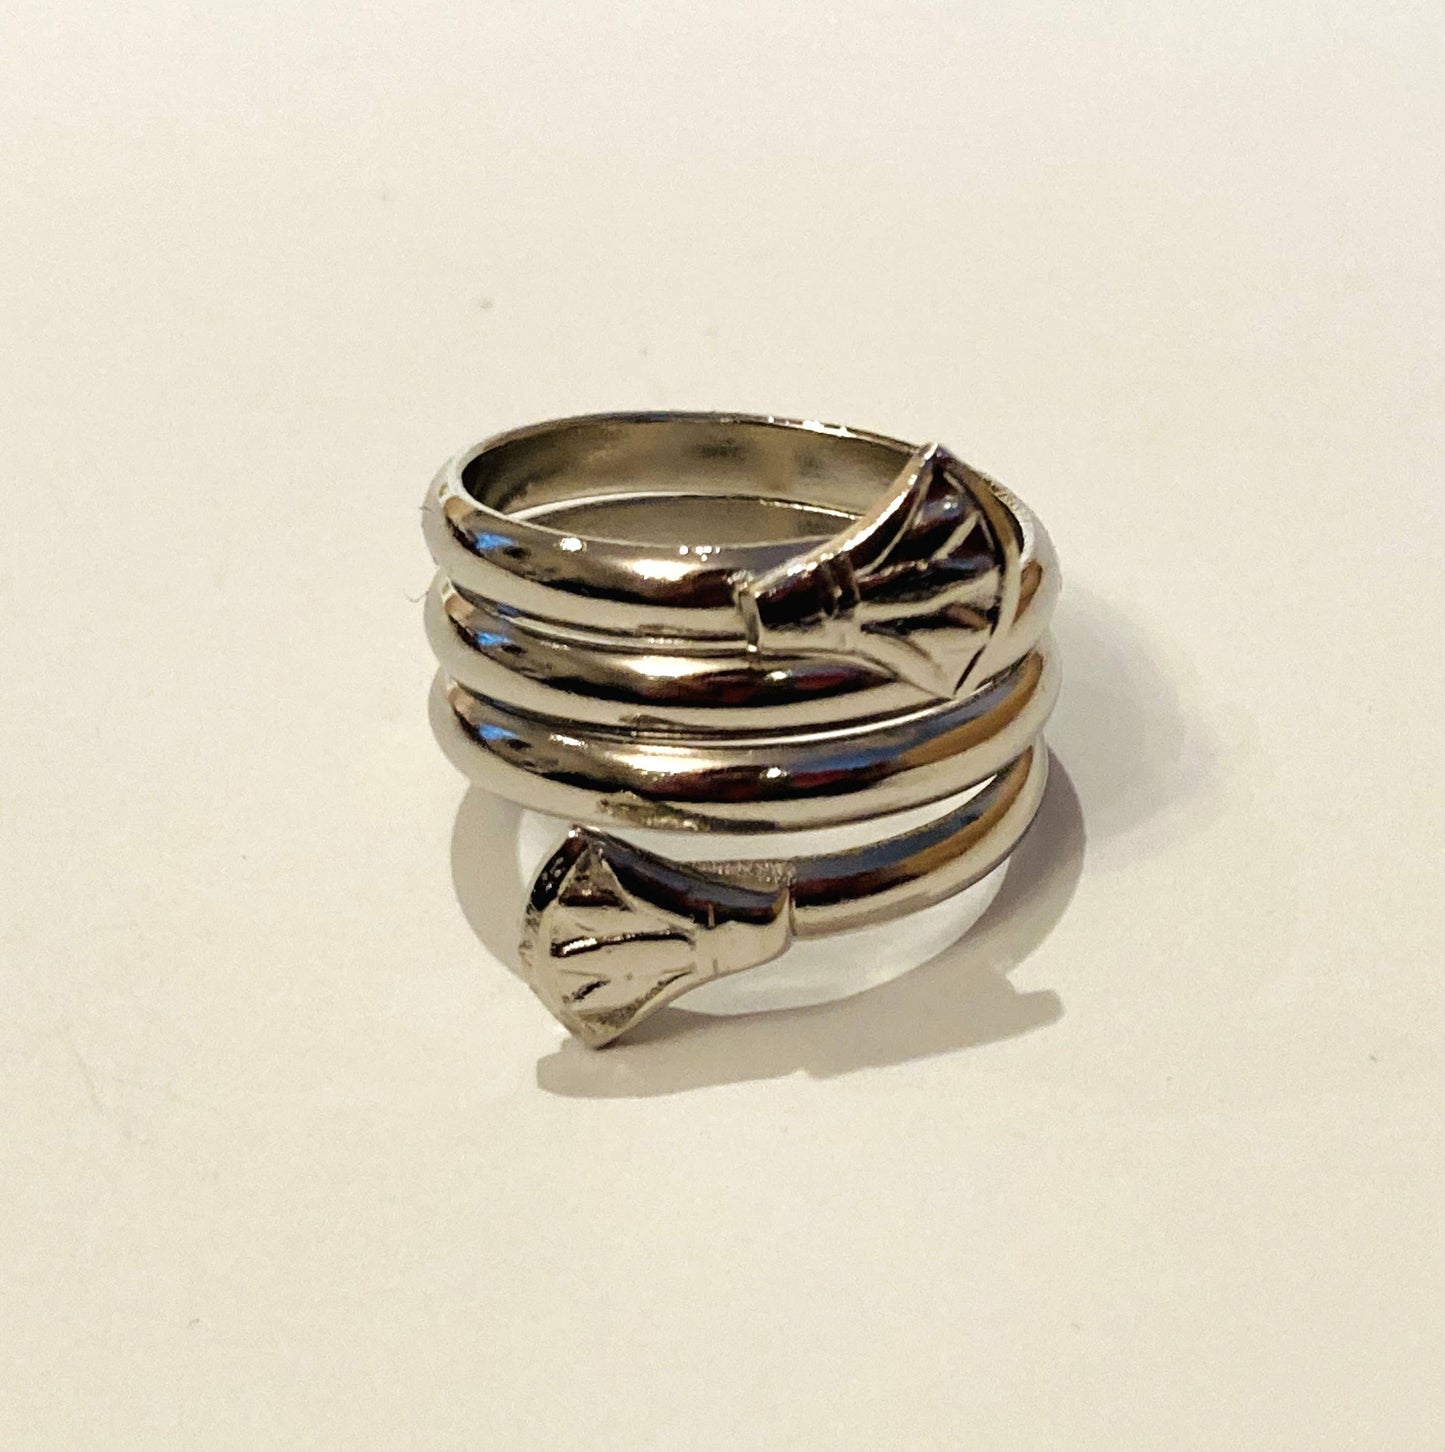 Handmade Brass Ring Plated with Nickel - Spiral with Lotus